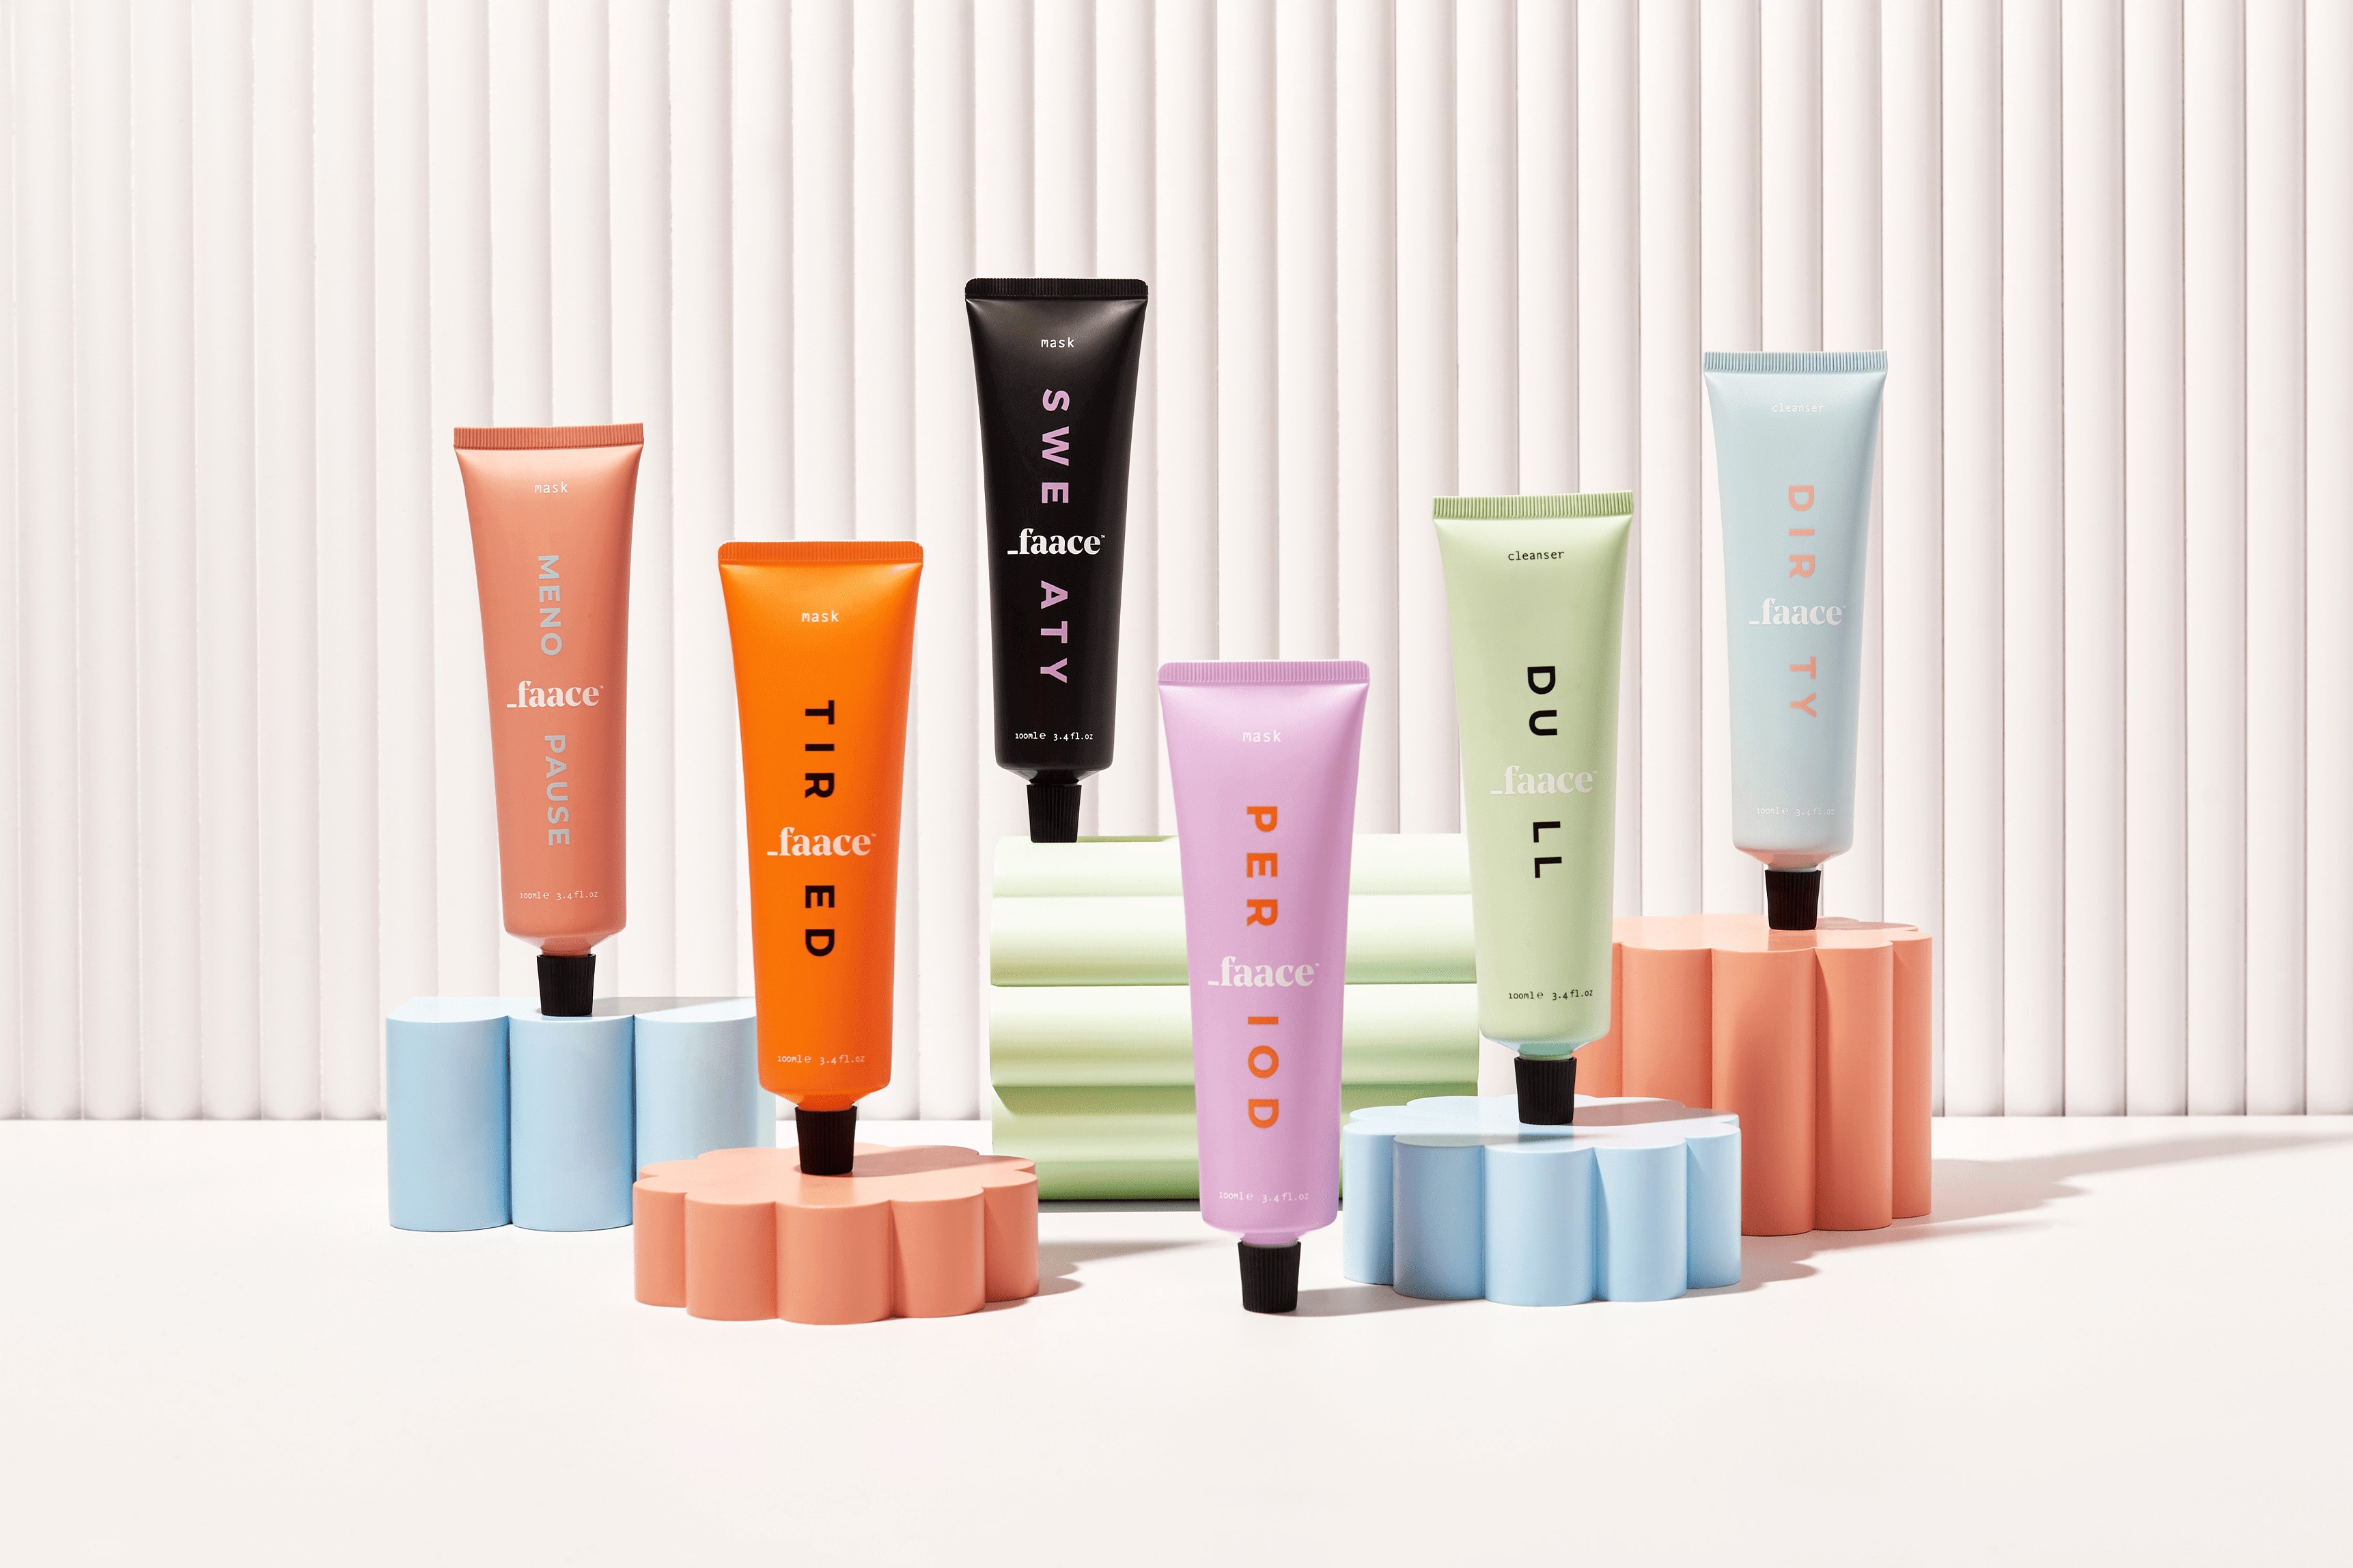 UK beauty brand Faace launches on Lookfantastic, Planet Organic and eyes expansion